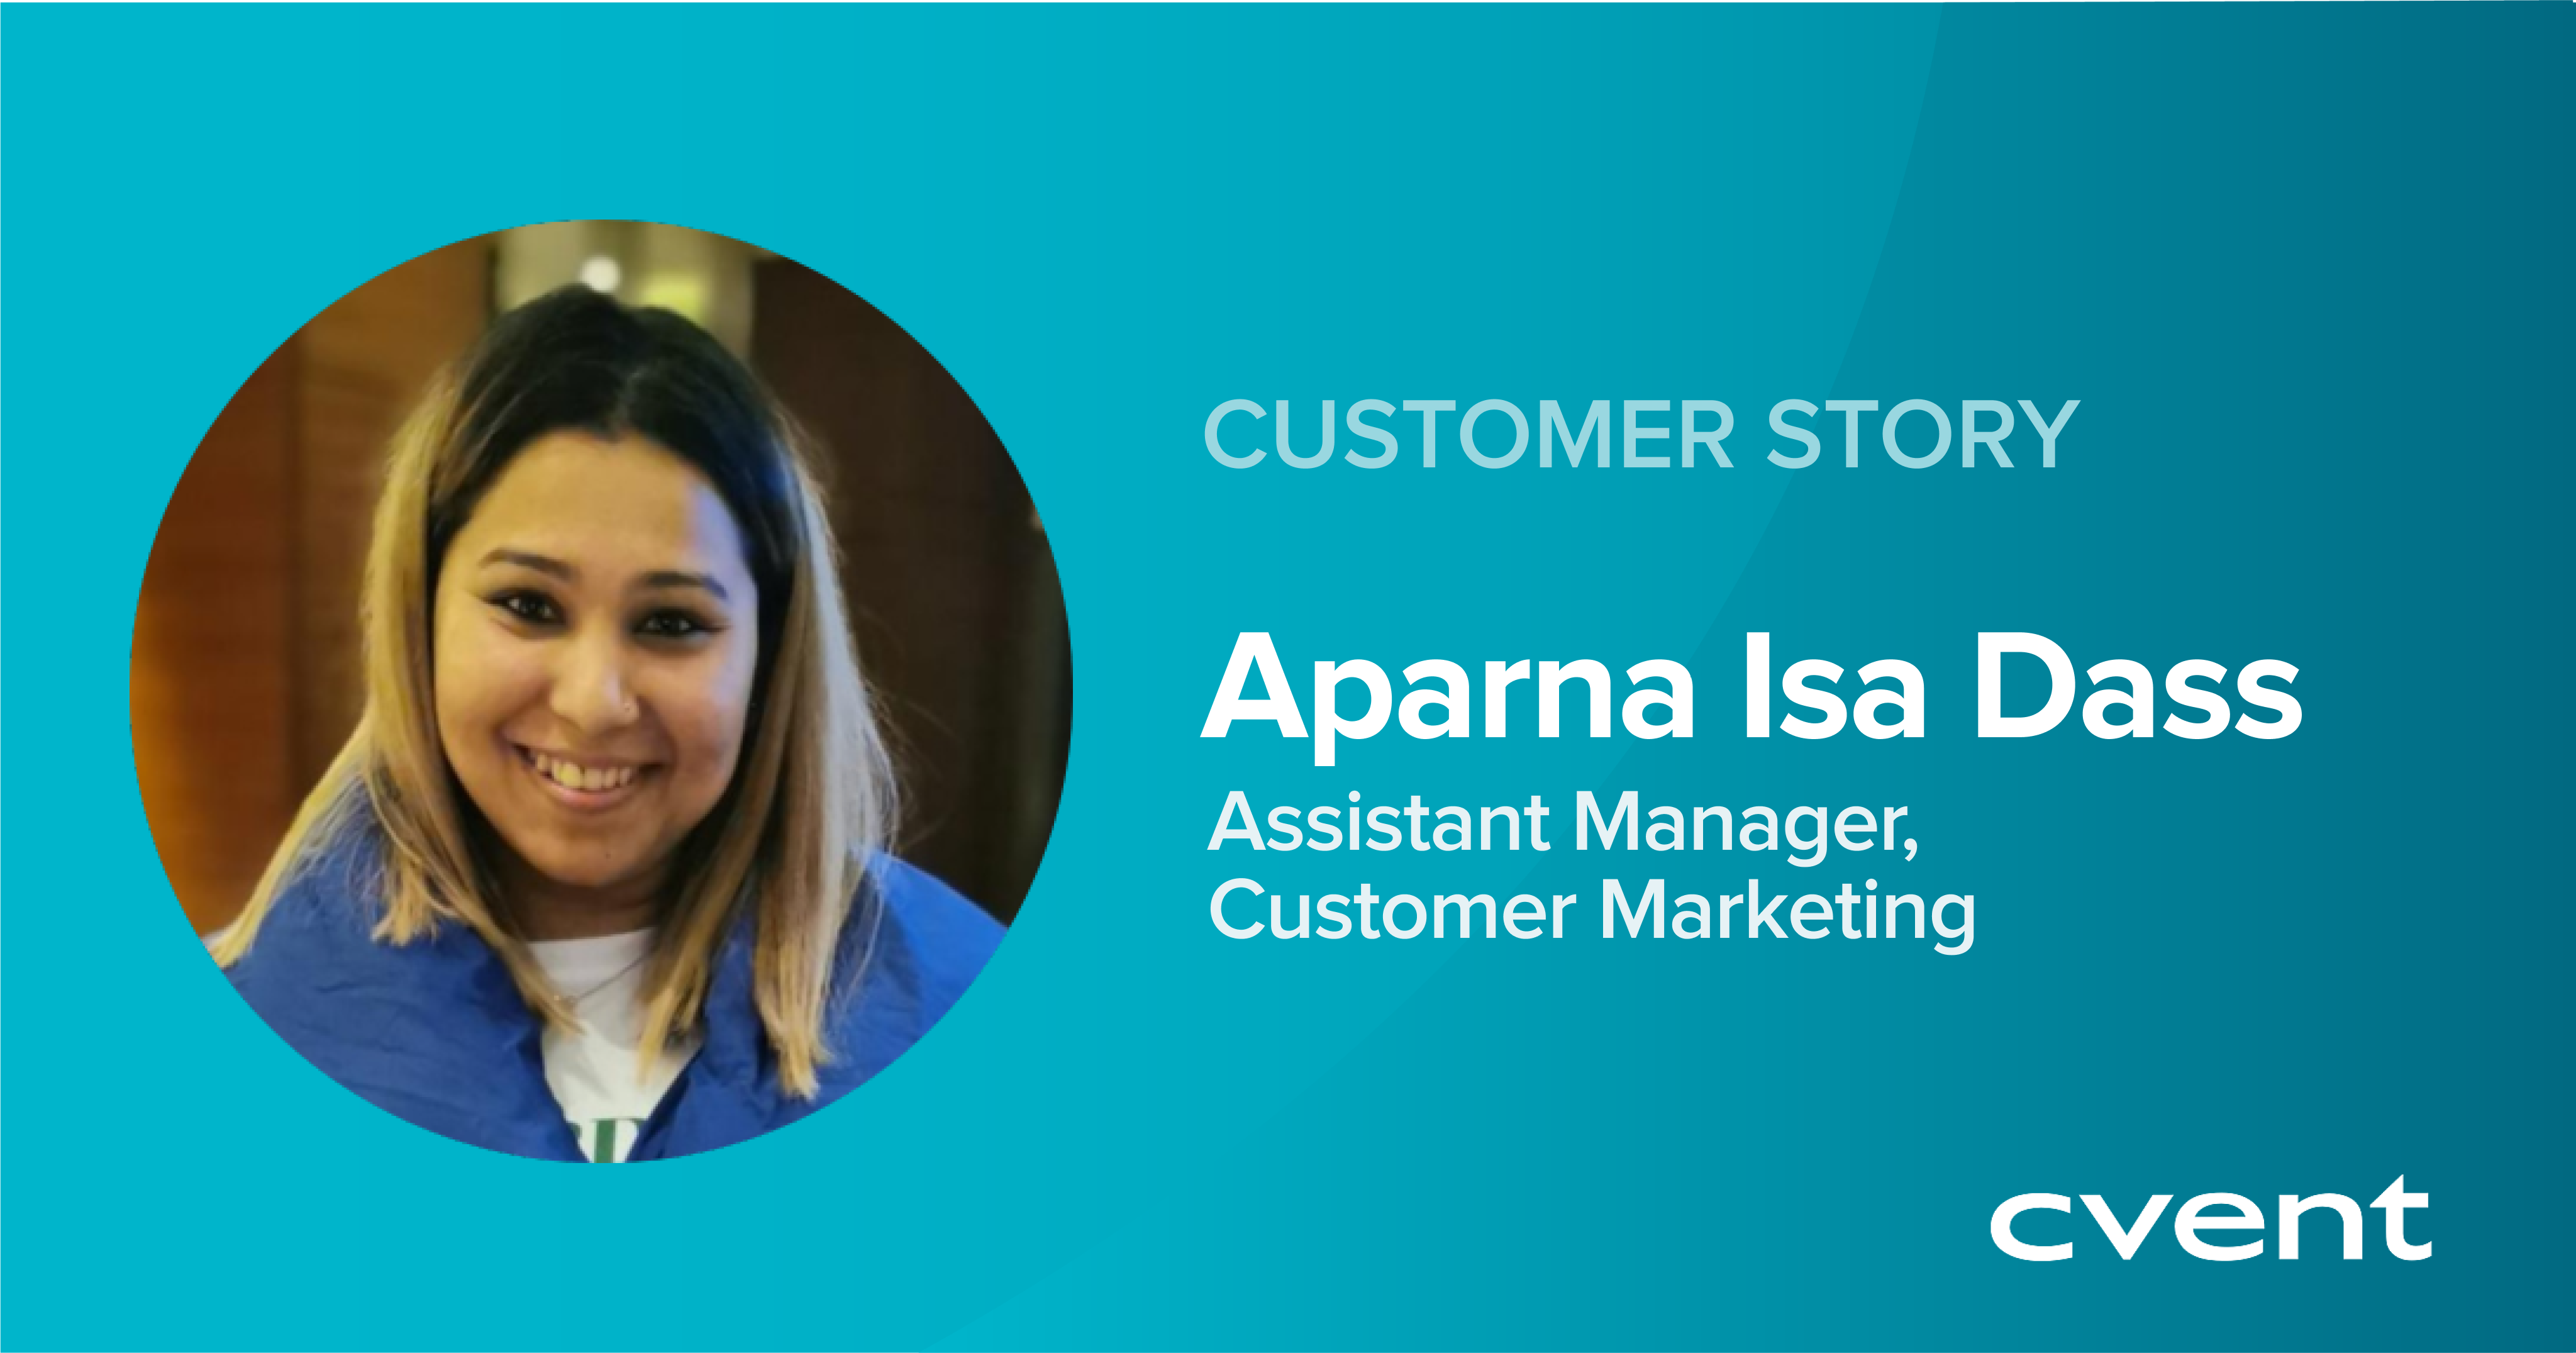 Story by Aparna Isa Dass, Assistant Manager of Customer Marketing, Cvent